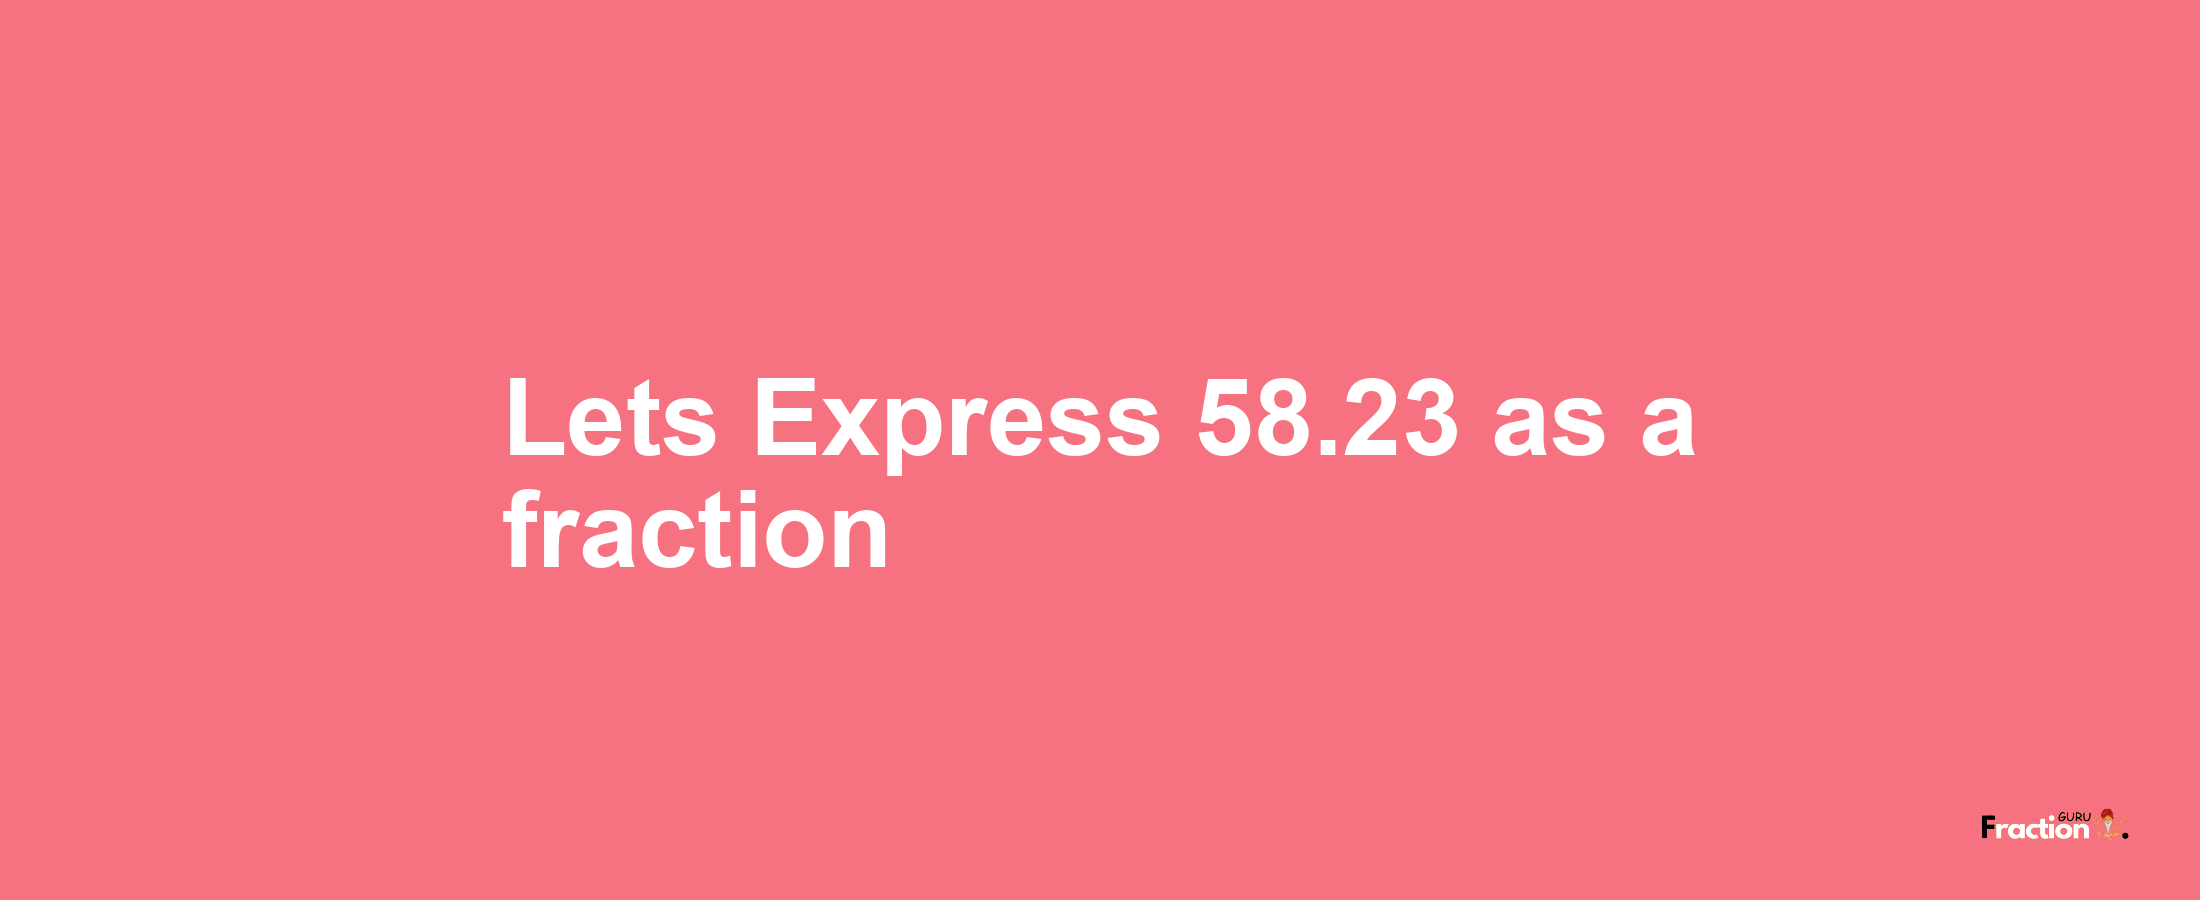 Lets Express 58.23 as afraction